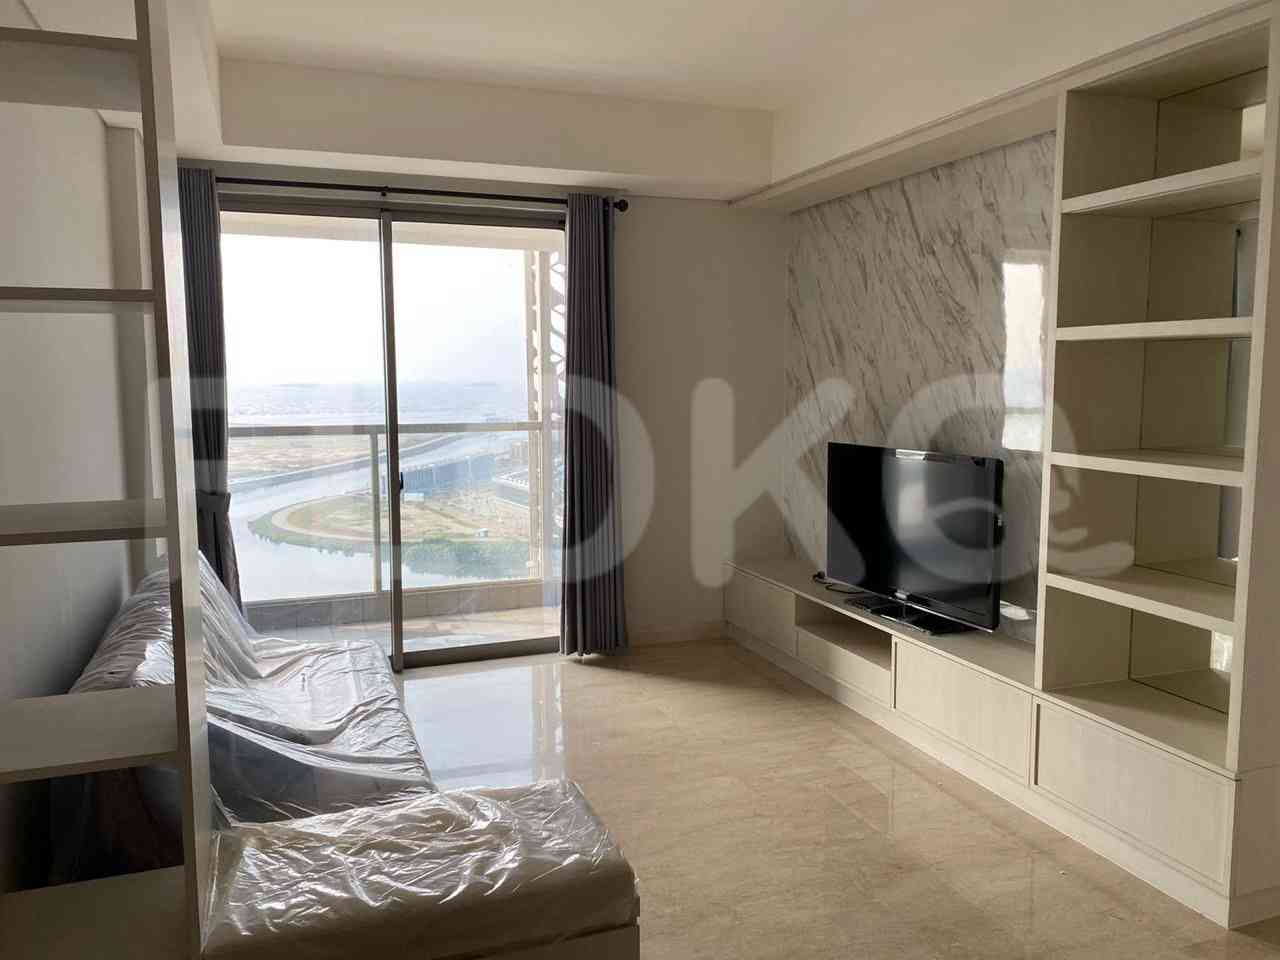 3 Bedroom on 28th Floor for Rent in Gold Coast Apartment - fkaee8 2